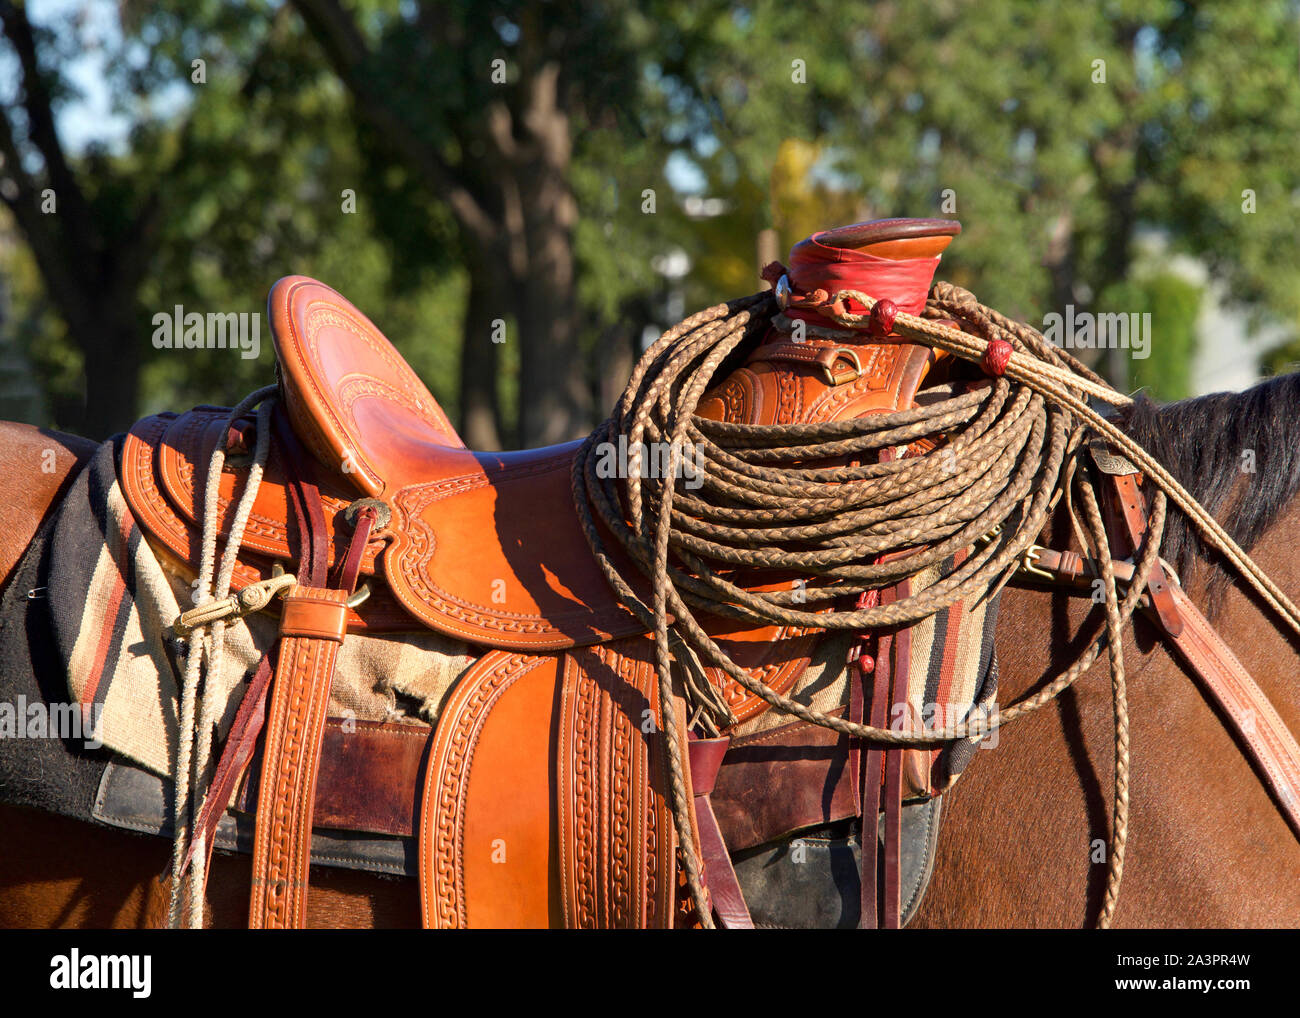 Close up on saddle on a brown horse with cowboy rope lasso curled on the saddle horn. Green trees in background. Stock Photo